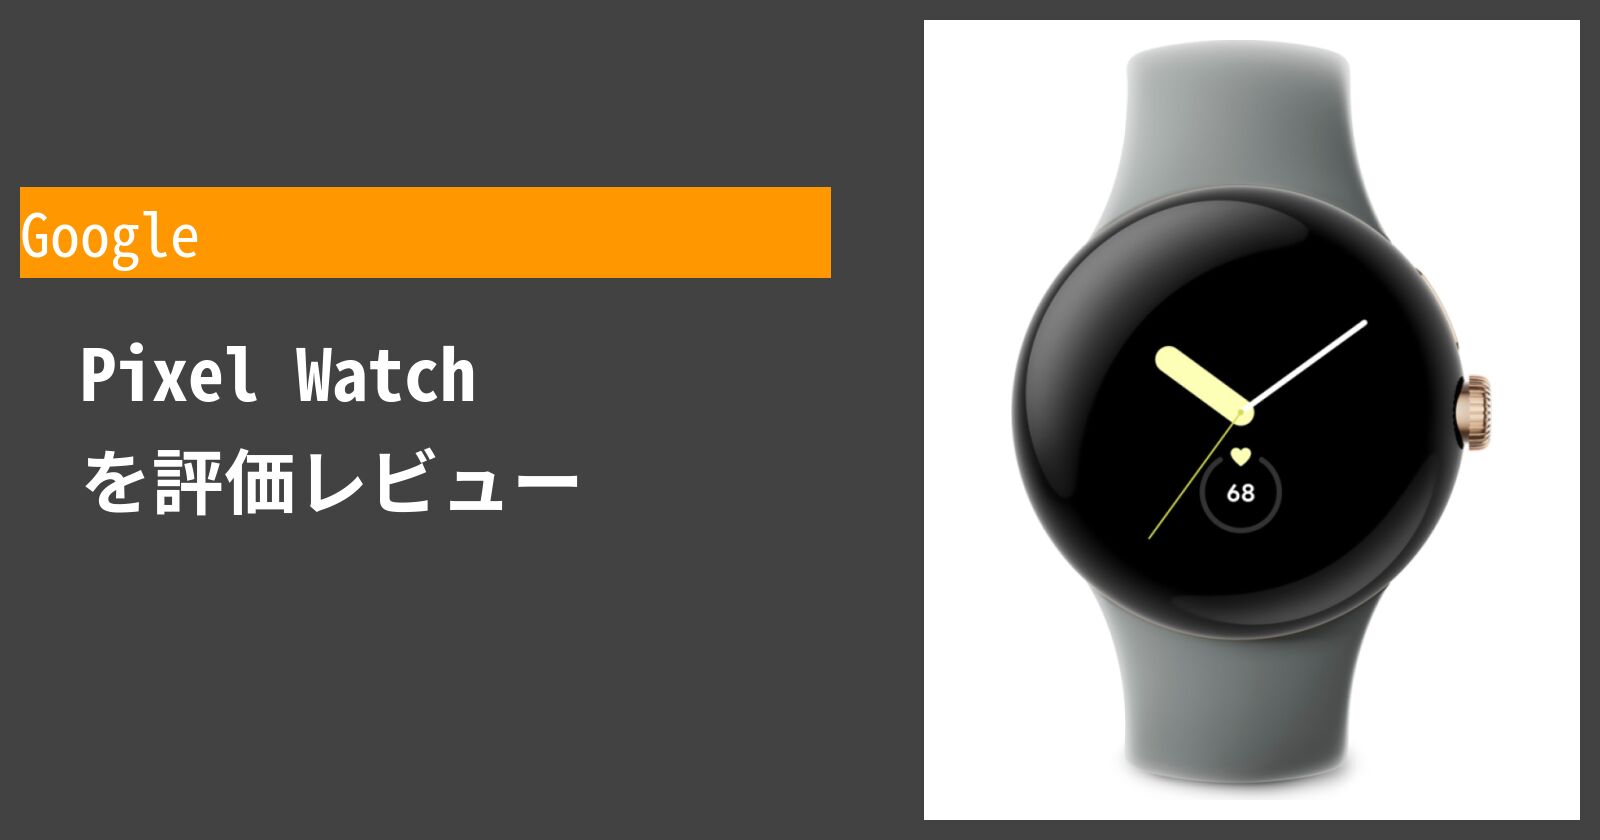  Pixel Watch を徹底評価